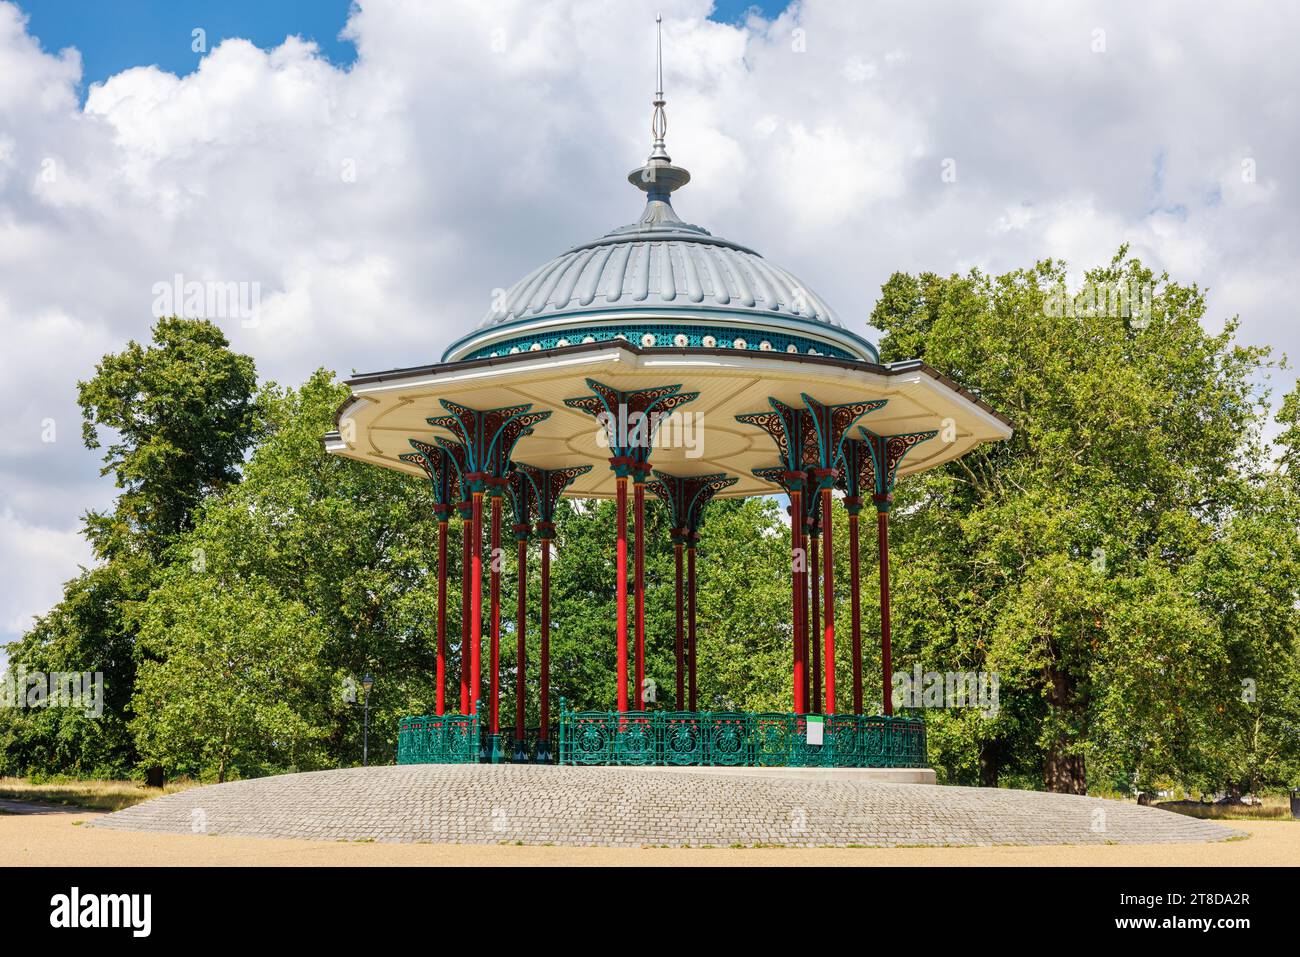 View to Clapham Common Bandstand in the heart of Clapham. Lambeth, Greater London, England Stock Photo